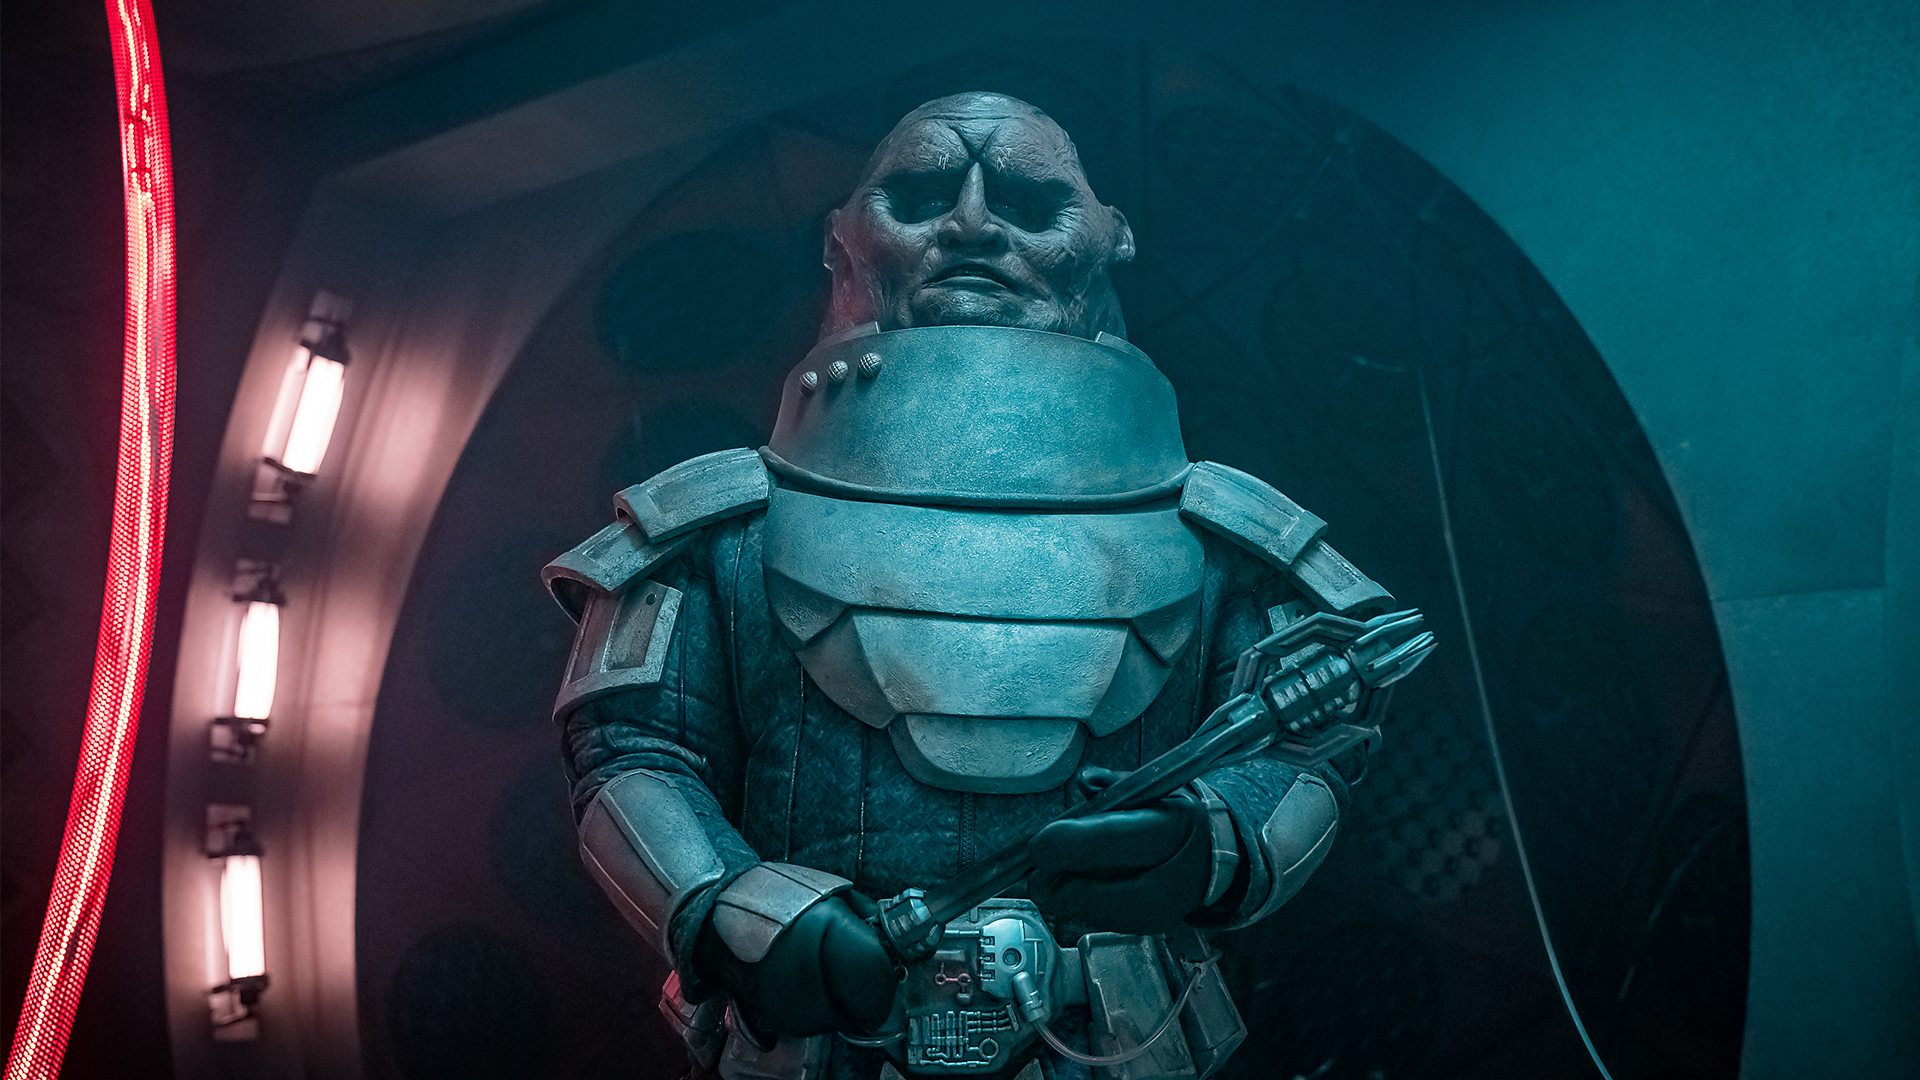 'Doctor Who': 10 Things You May Not Know About Sontarans